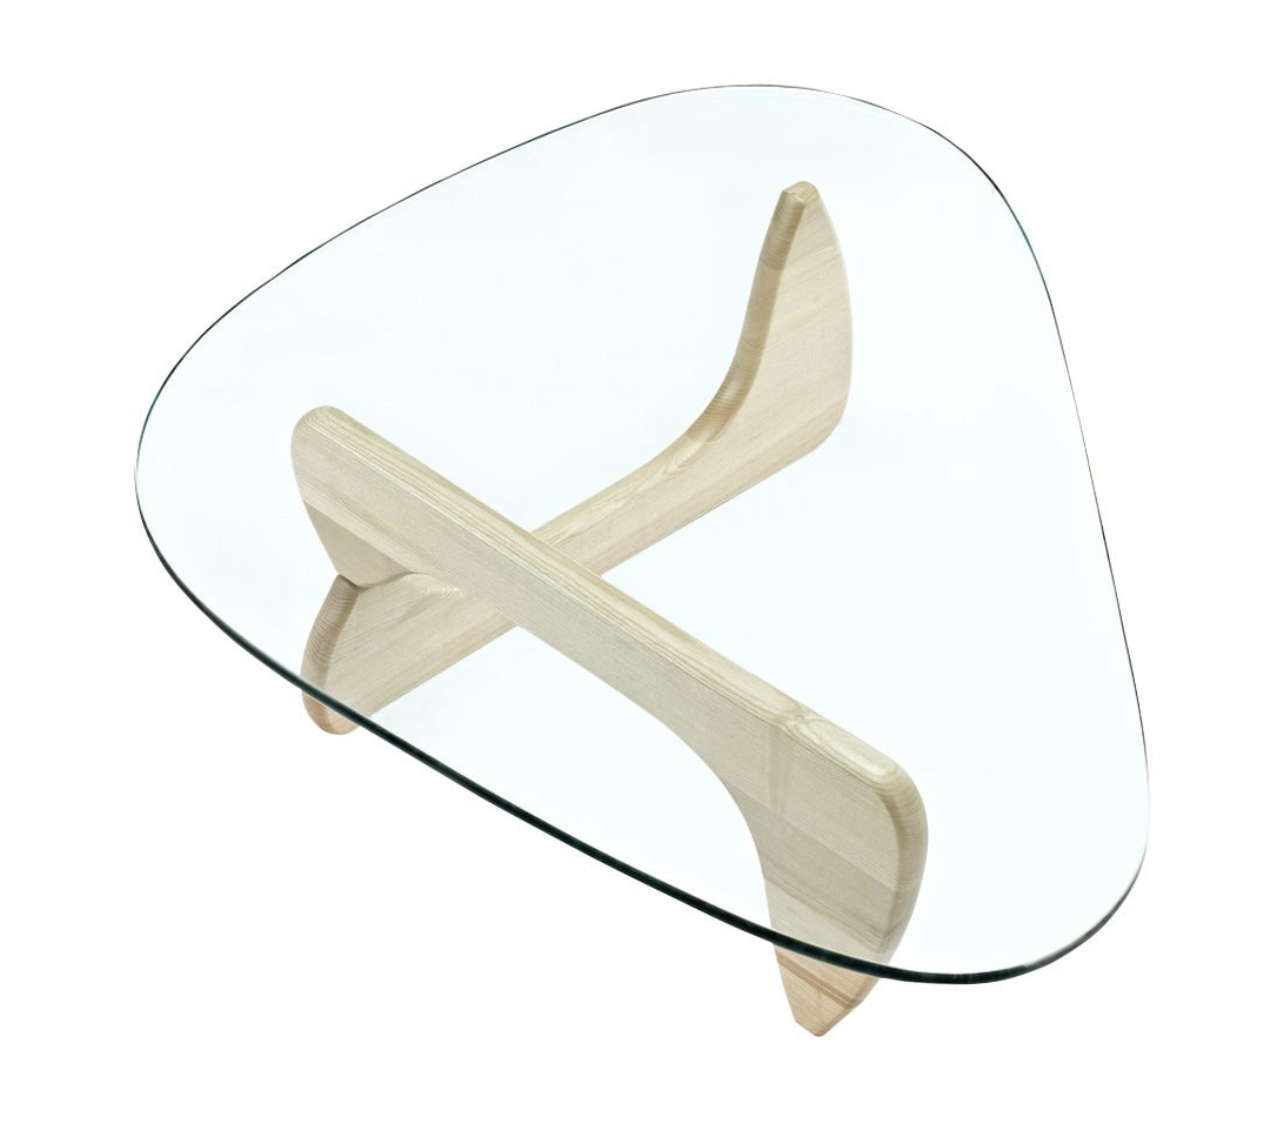 Noguchi inspired Designer Notting Hill natural ash  triangular coffee table 8mm  glass top  CURRENTLY IN STOCK 